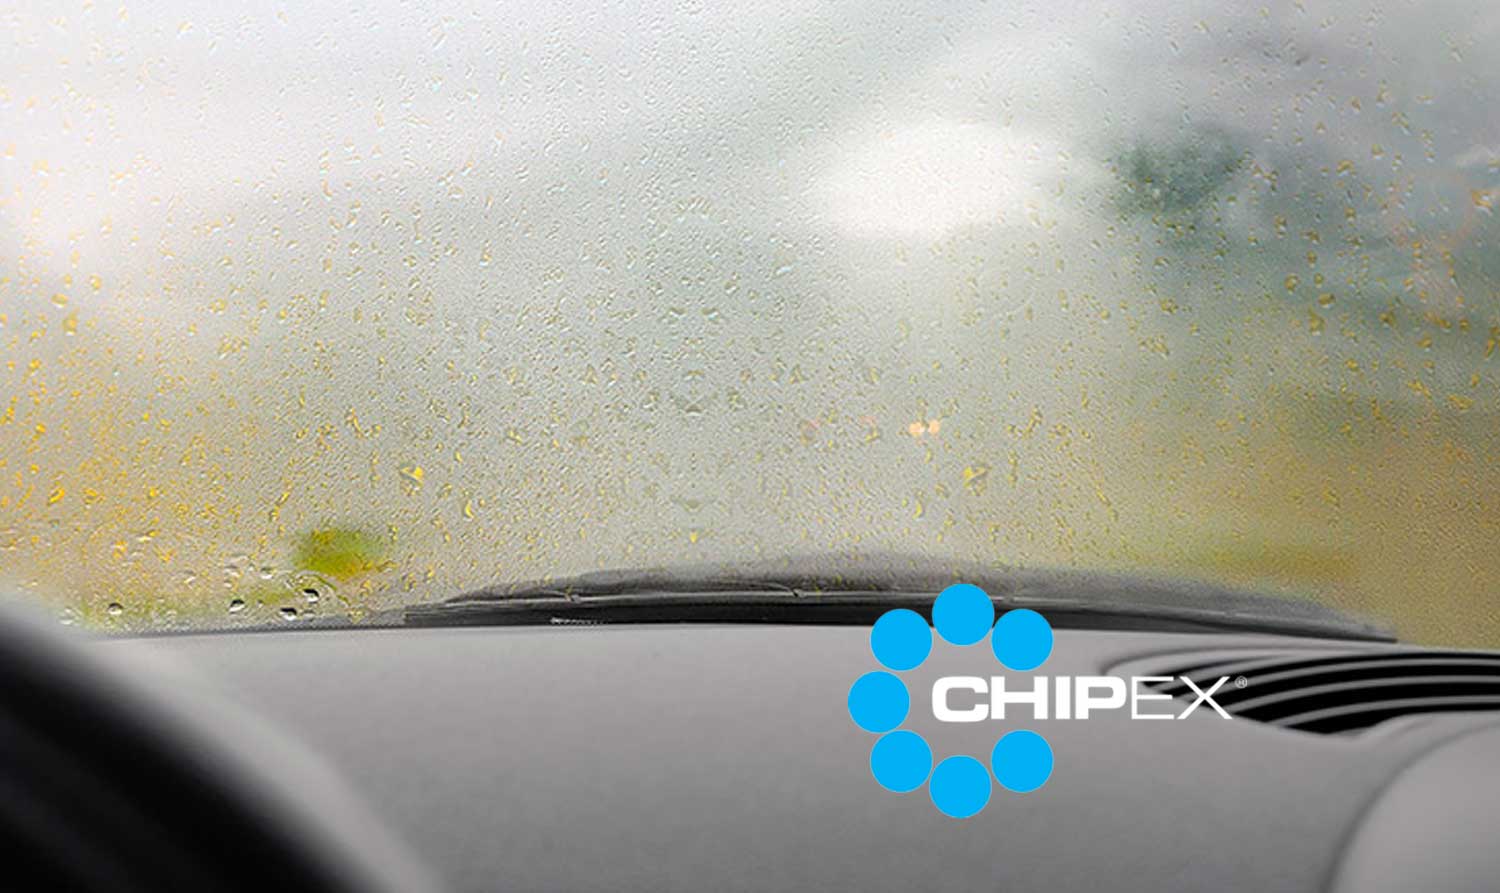 Ditch the face cloth, here's how to defog your windshield easily